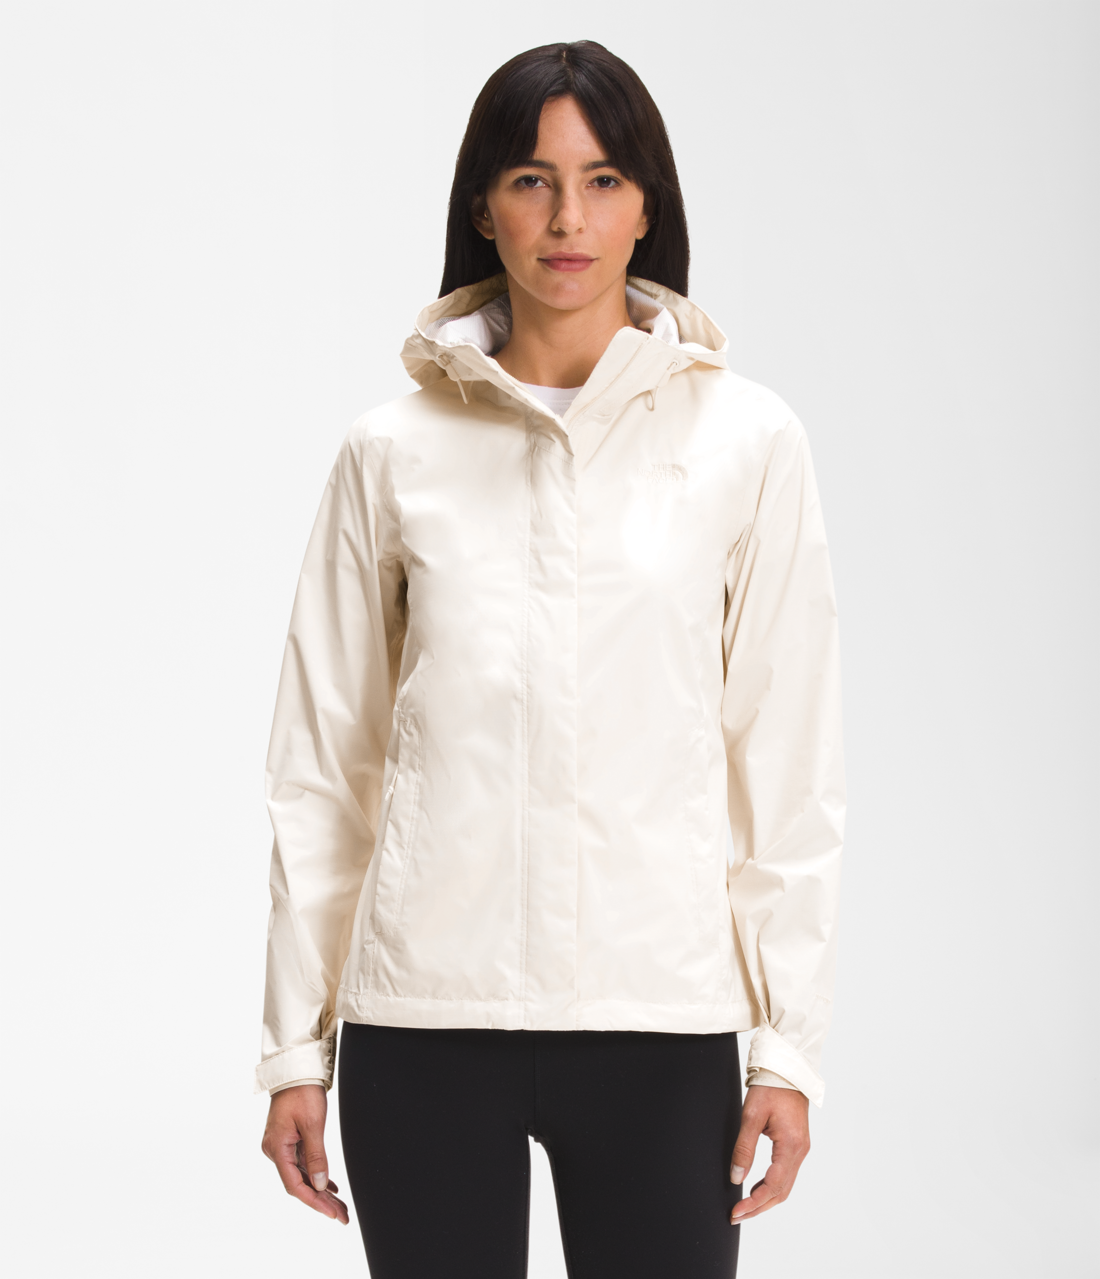 The North Face Women's Venture 2 Jacket